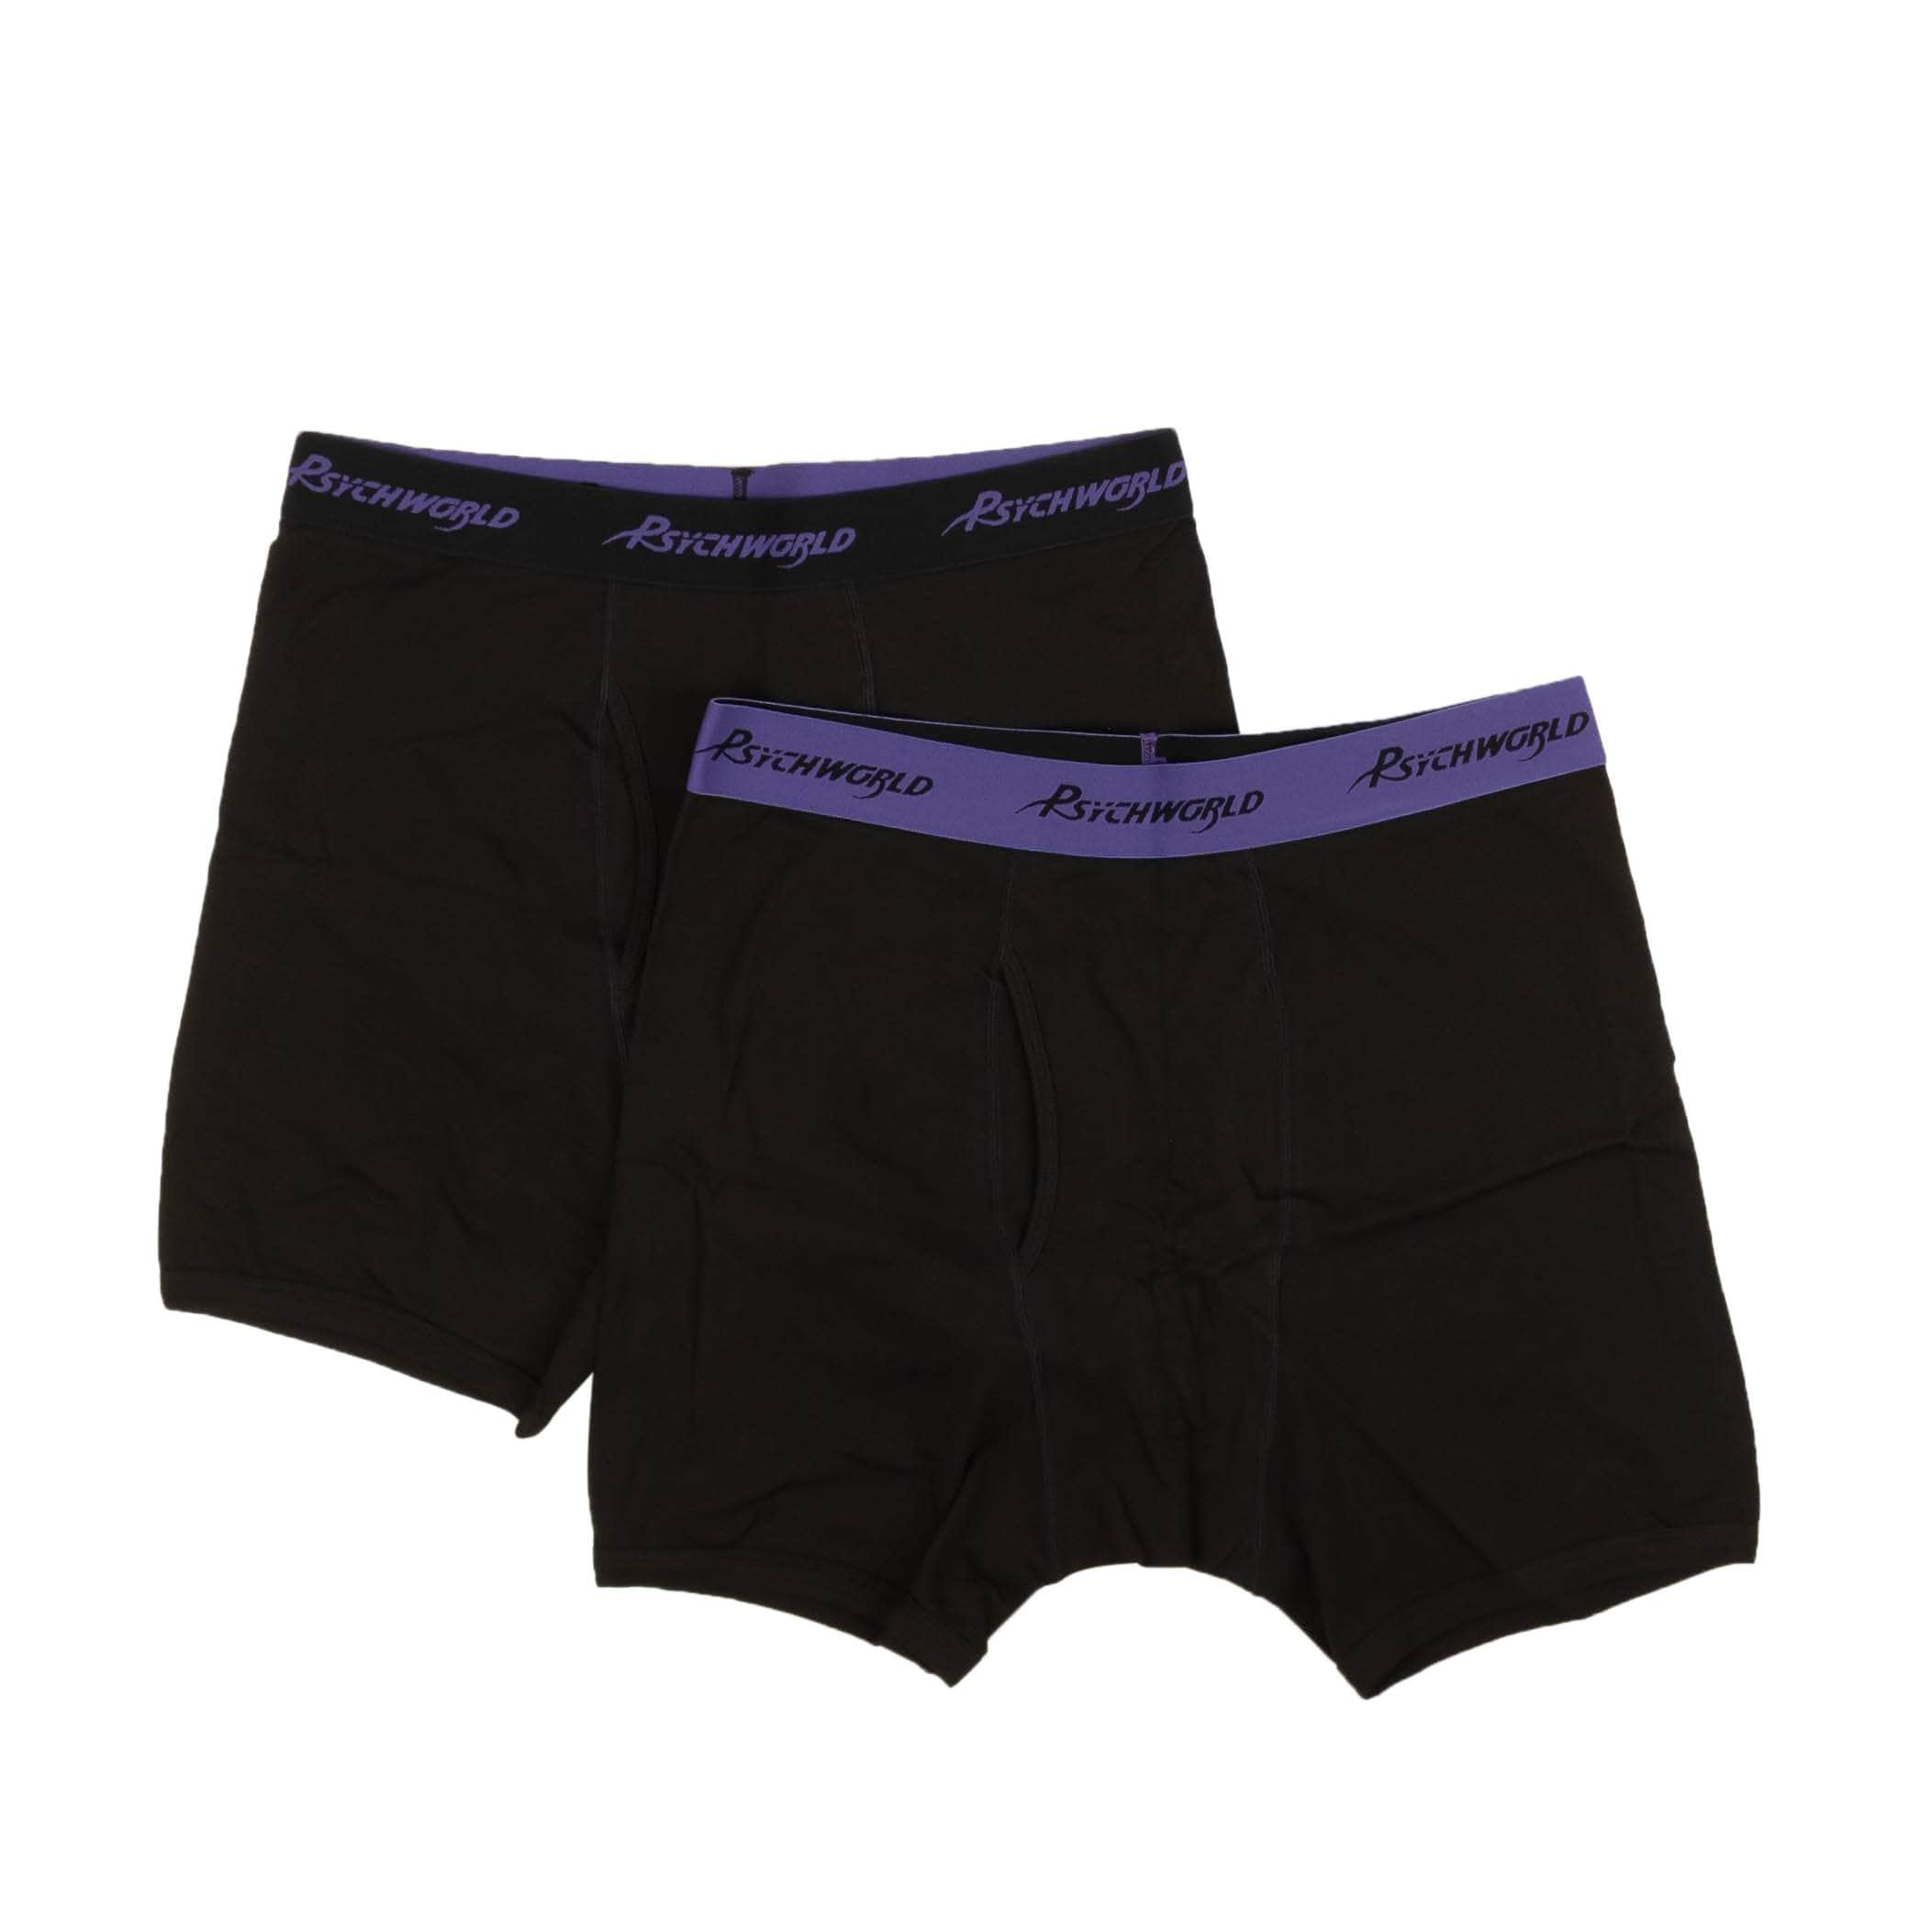 Psychworld channelenable-all, chicmi, couponcollection, gender-mens, main-clothing, mens-shoes, mens-underwear, MixedApparel, psychworld, size-m, size-xs, size-xxl, SPO, under-250 95-PSY-1034/XS Boxer_Shorts_Black/Purple Black/Purple PSYCHWORLD Logo Band Boxer Shorts 2 Pack